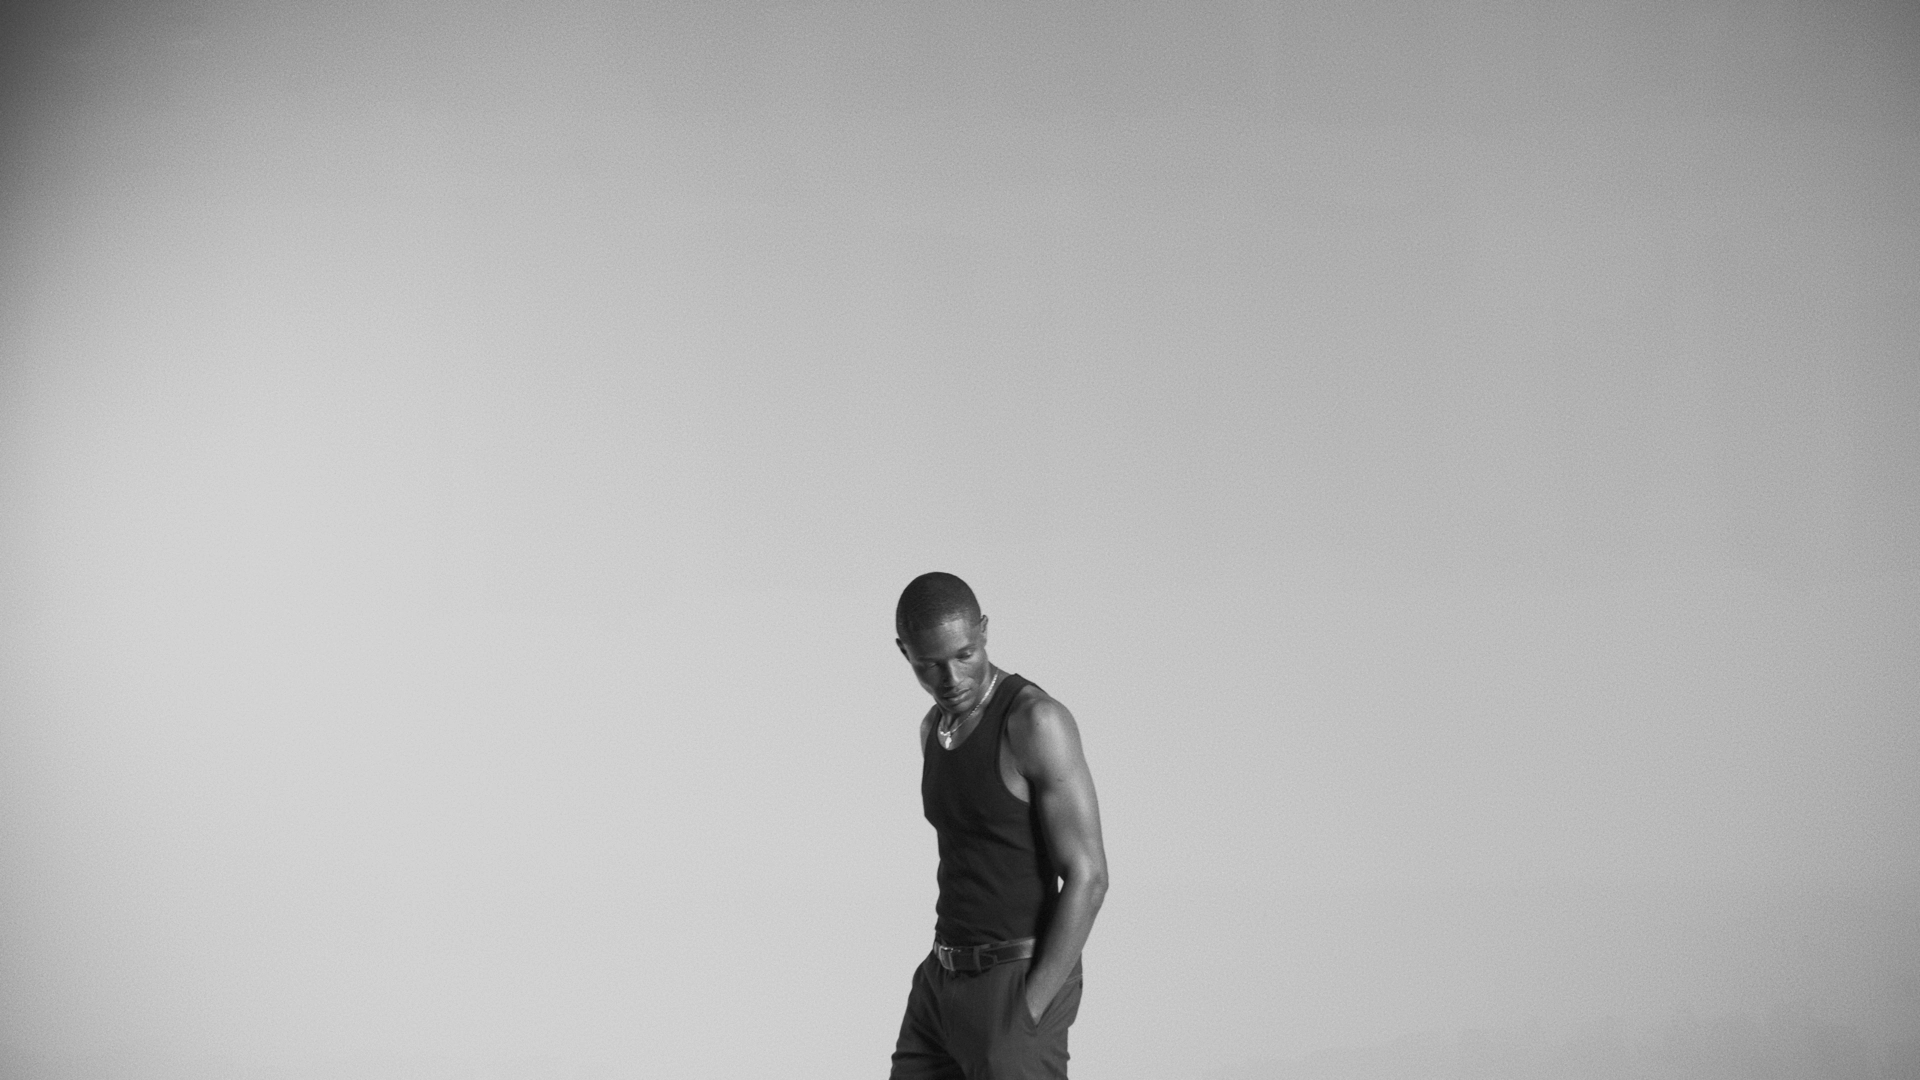 Black and white side profile of African American man wearing tank top looking slightly behind him